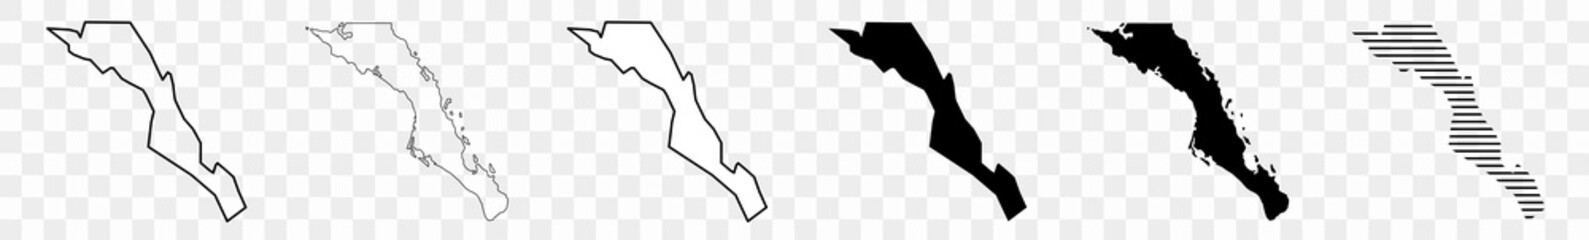 Baja California Sur Map Black | State Border | Mexico | Mexican | Federal Entity | America | Transparent Isolated | Variations